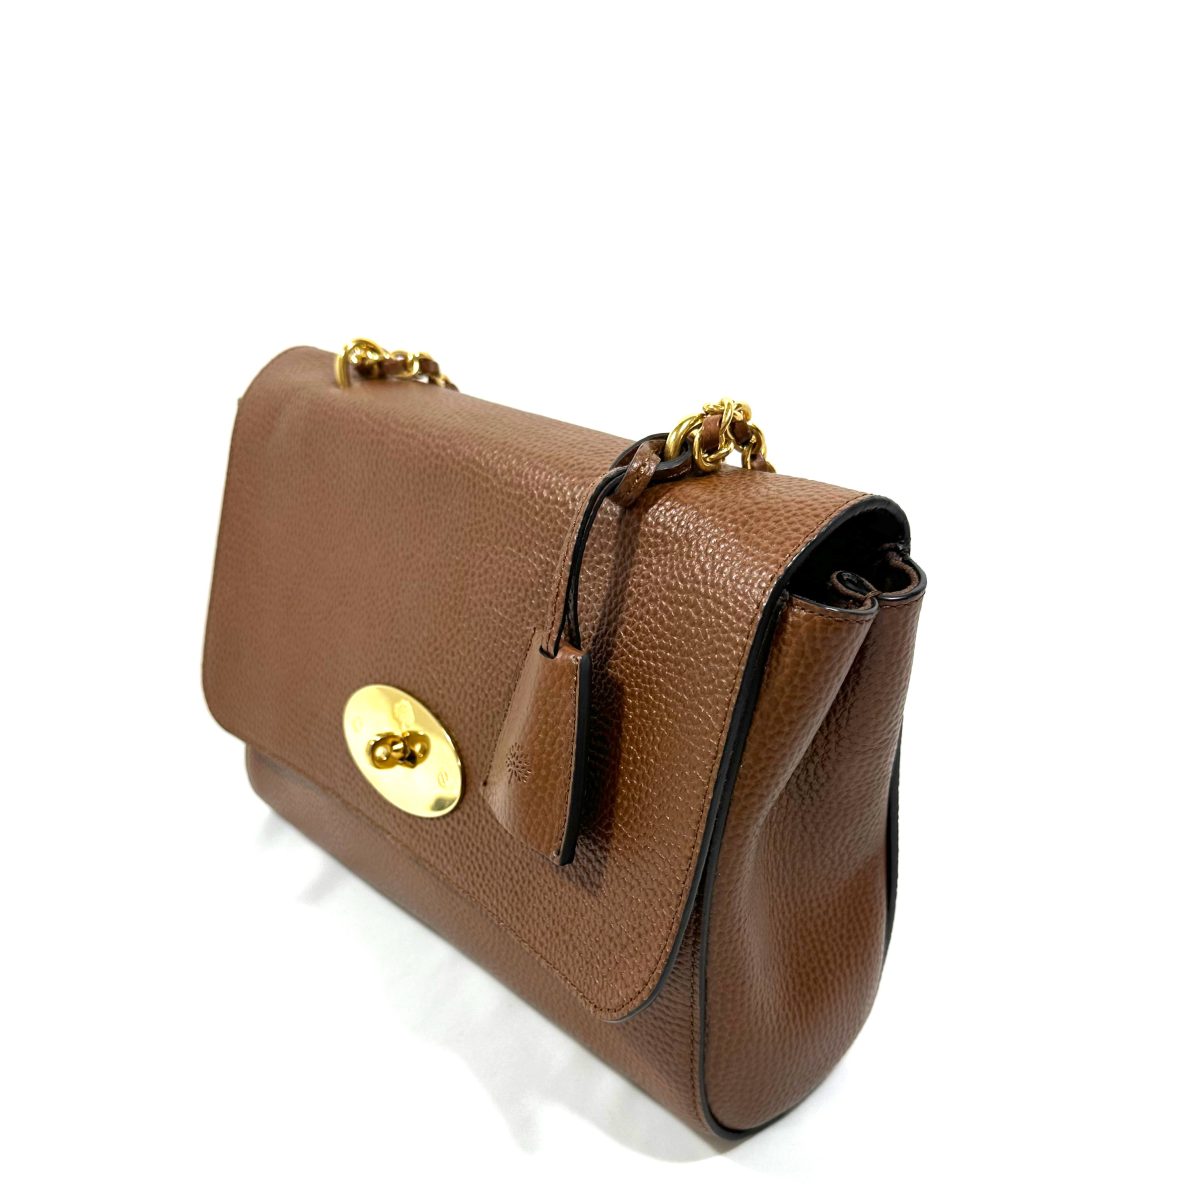 Mulberry vintage bags